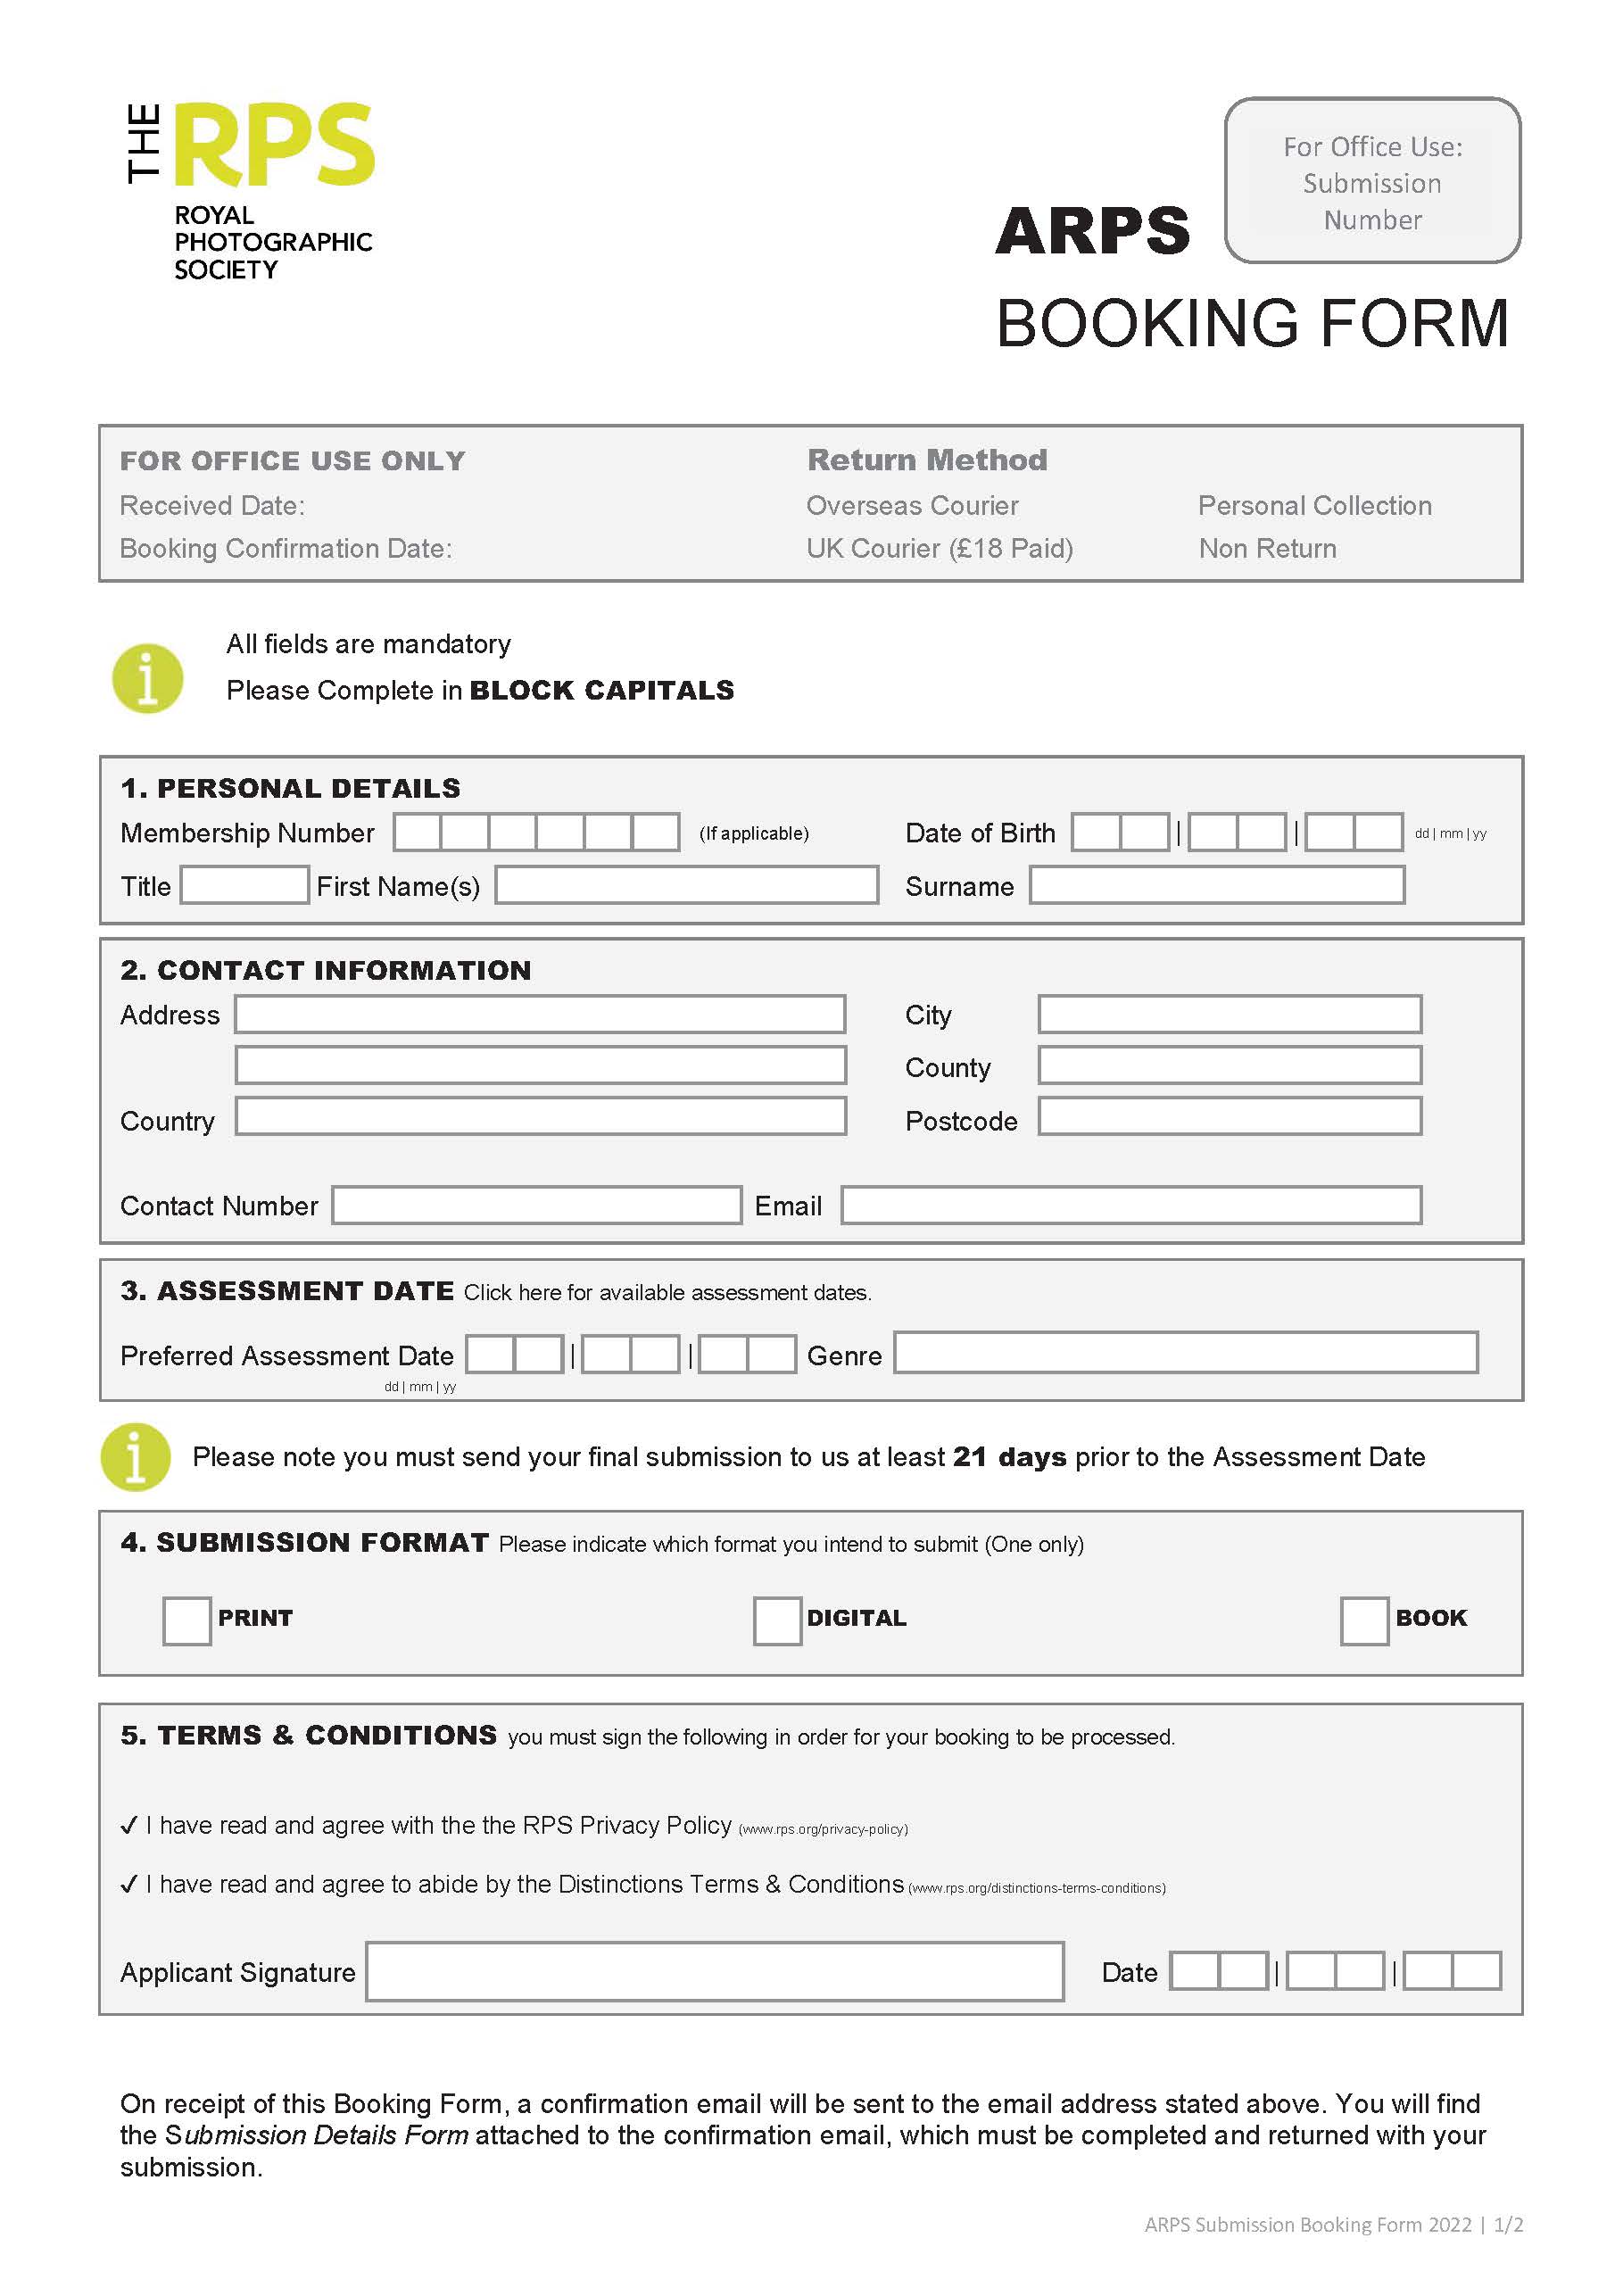 2022 ARPS  Booking Form_v.1_cover